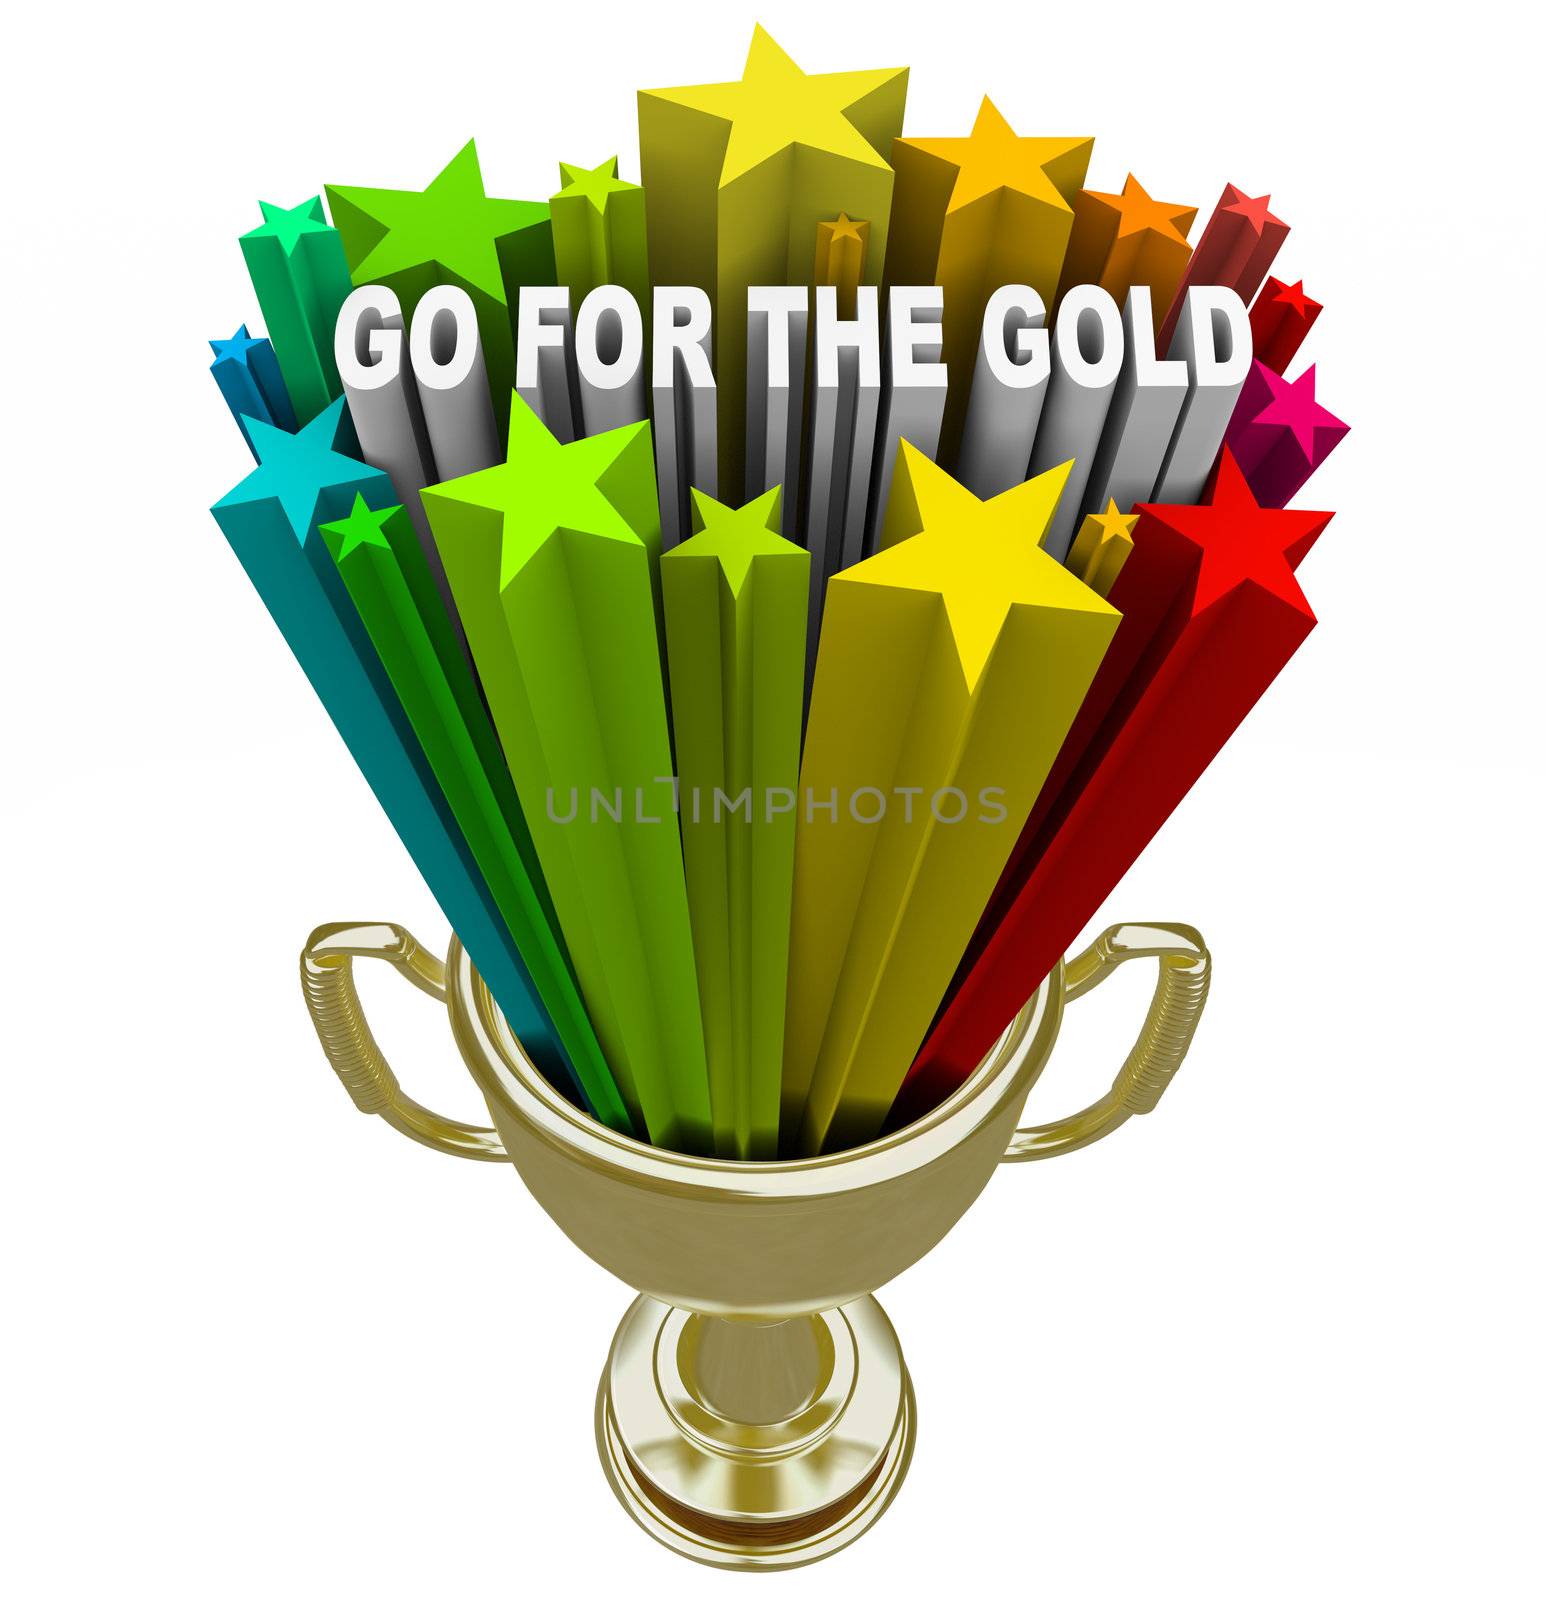 The words Go for the Gold shoot out of a golden trophy to encourage you to set your sights high and try to be the best and win the game, lifting your attitude and ambition